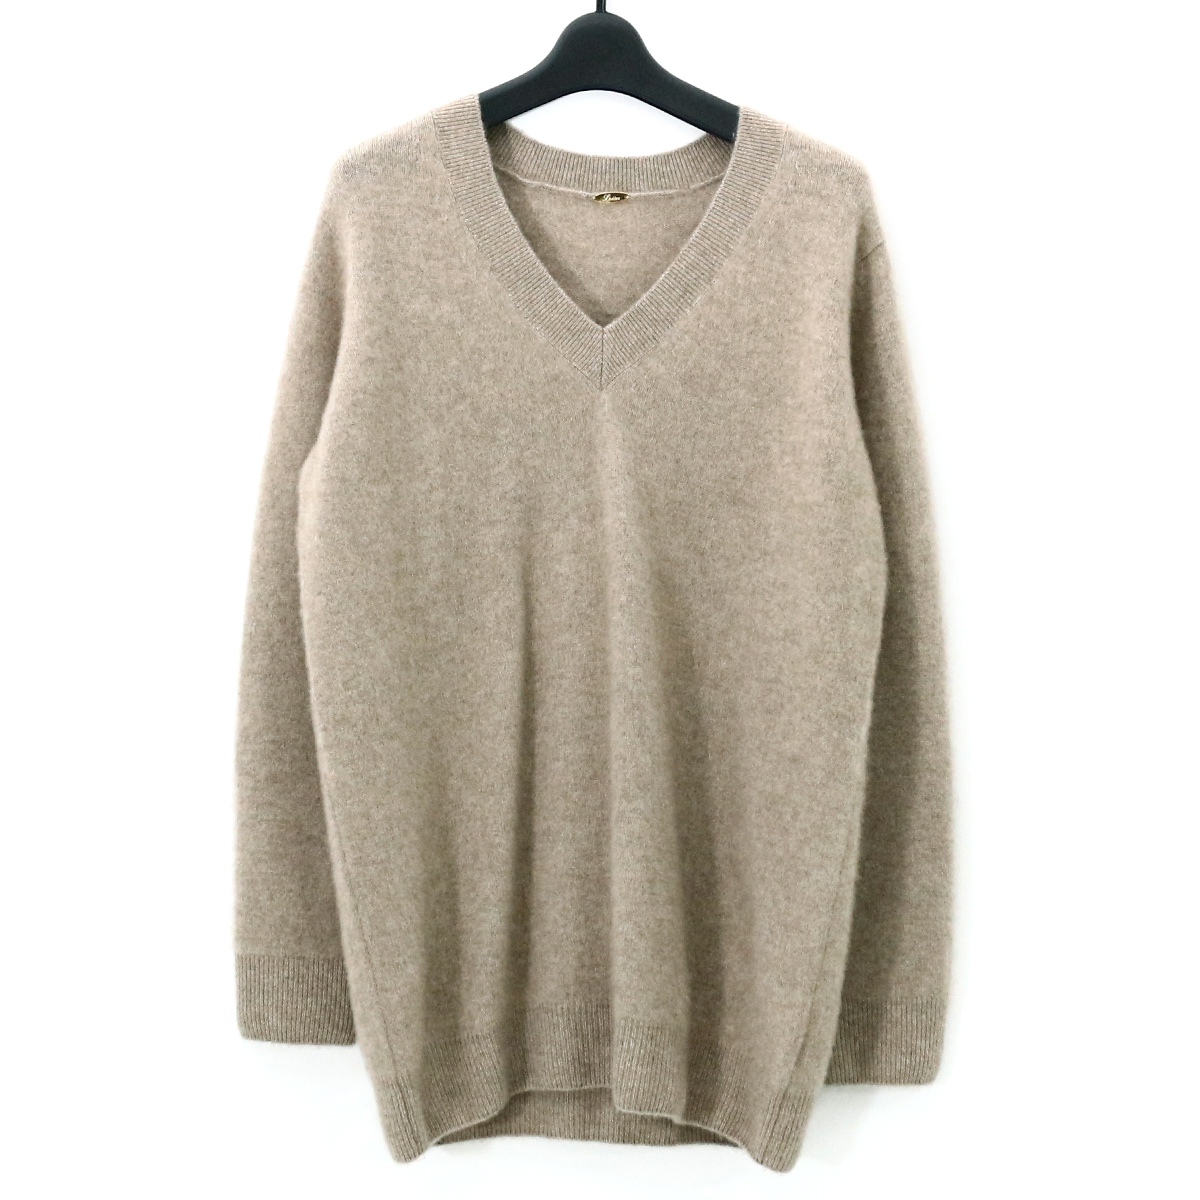 L'Appartement Lisiere アパルトモン リジエール 19AW Cashmere VN ...